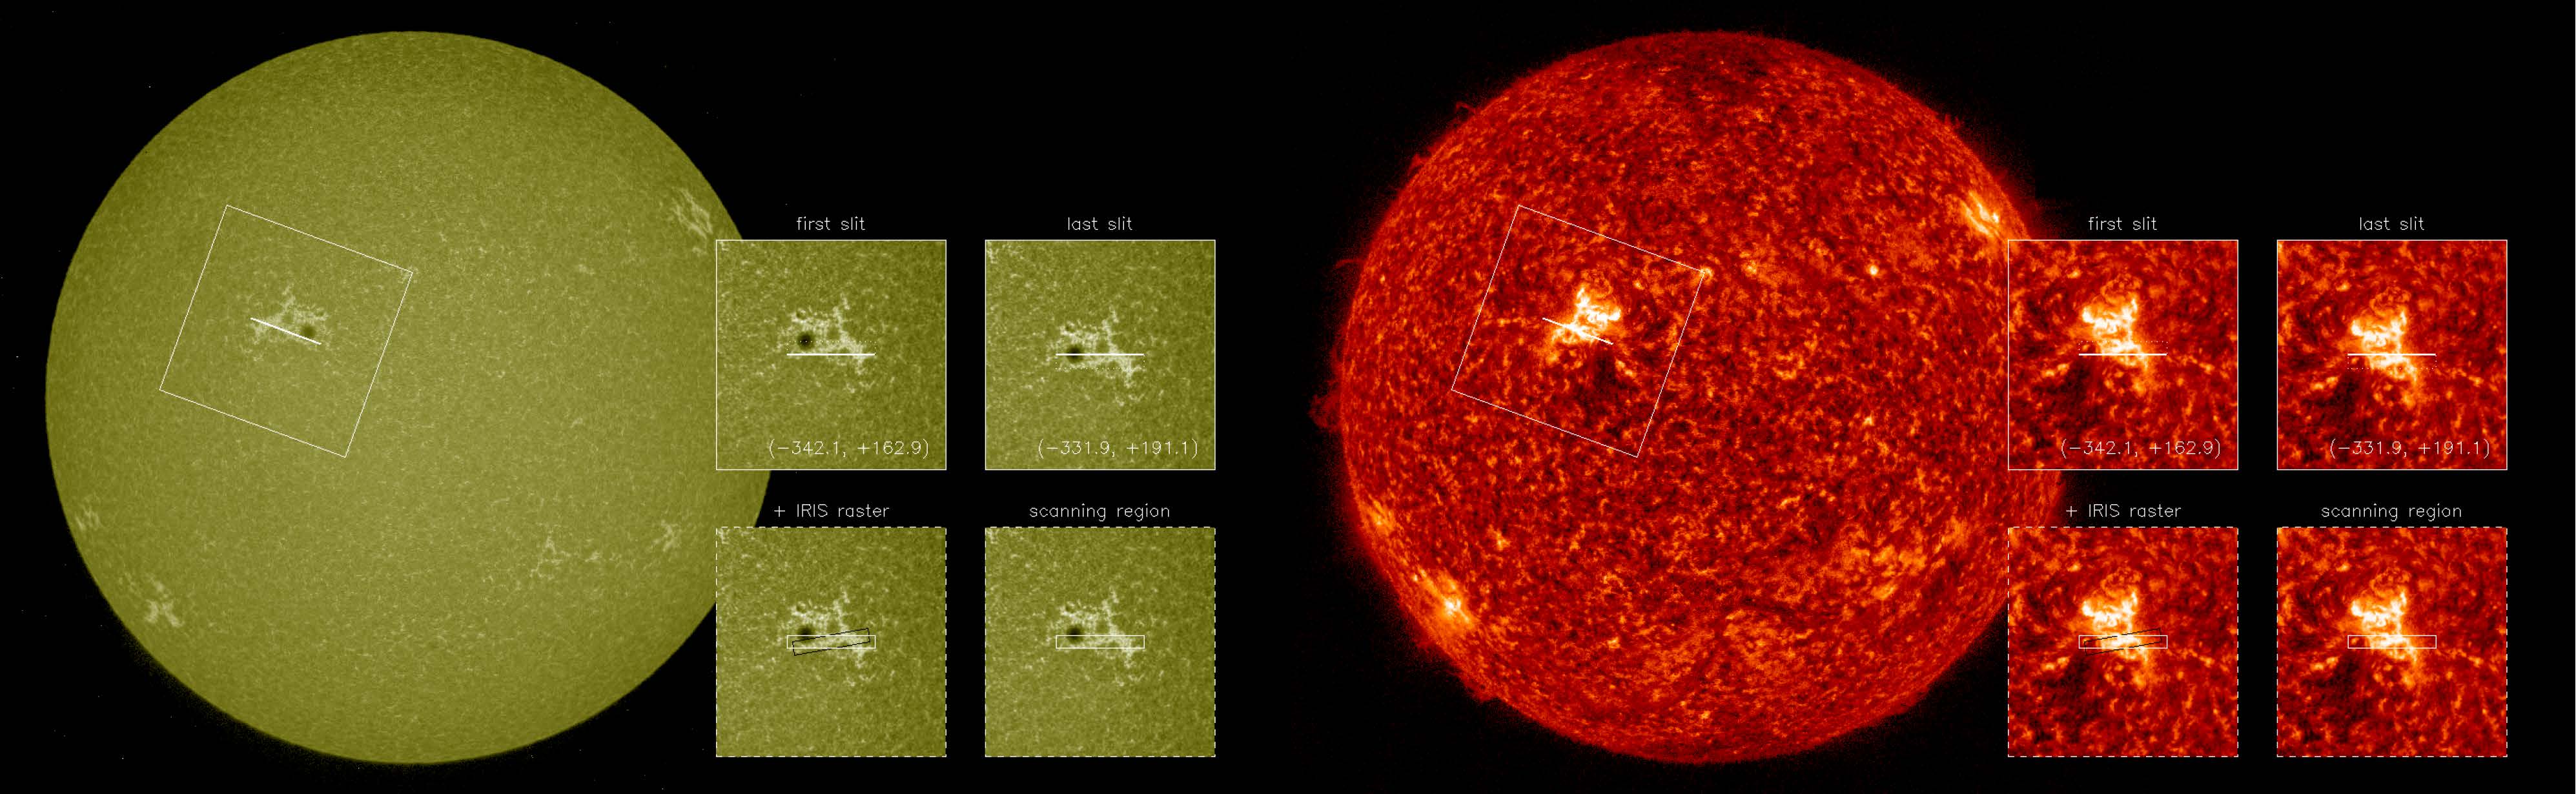 Figure 1: The region of the solar disk observed by CLASP2.1. The white rectangles in the lower right inset images of both panels indicate the area where the intensity and polarization of the ultraviolet radiation has been measured.